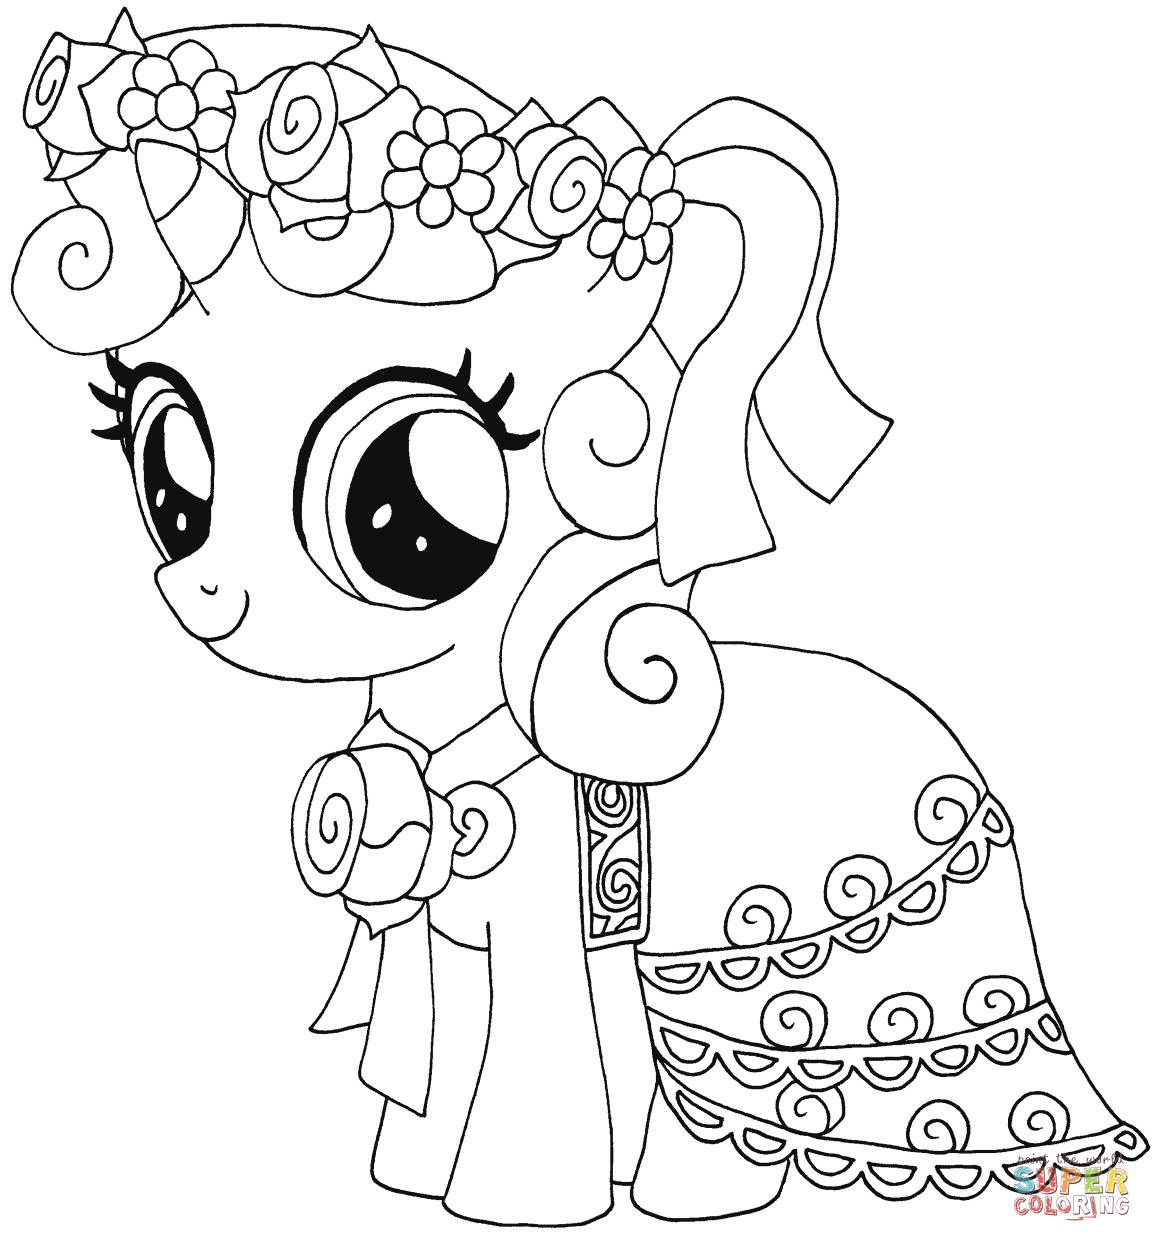 My Little Pony Sweetie Belle from My Little Pony Coloring Page - My